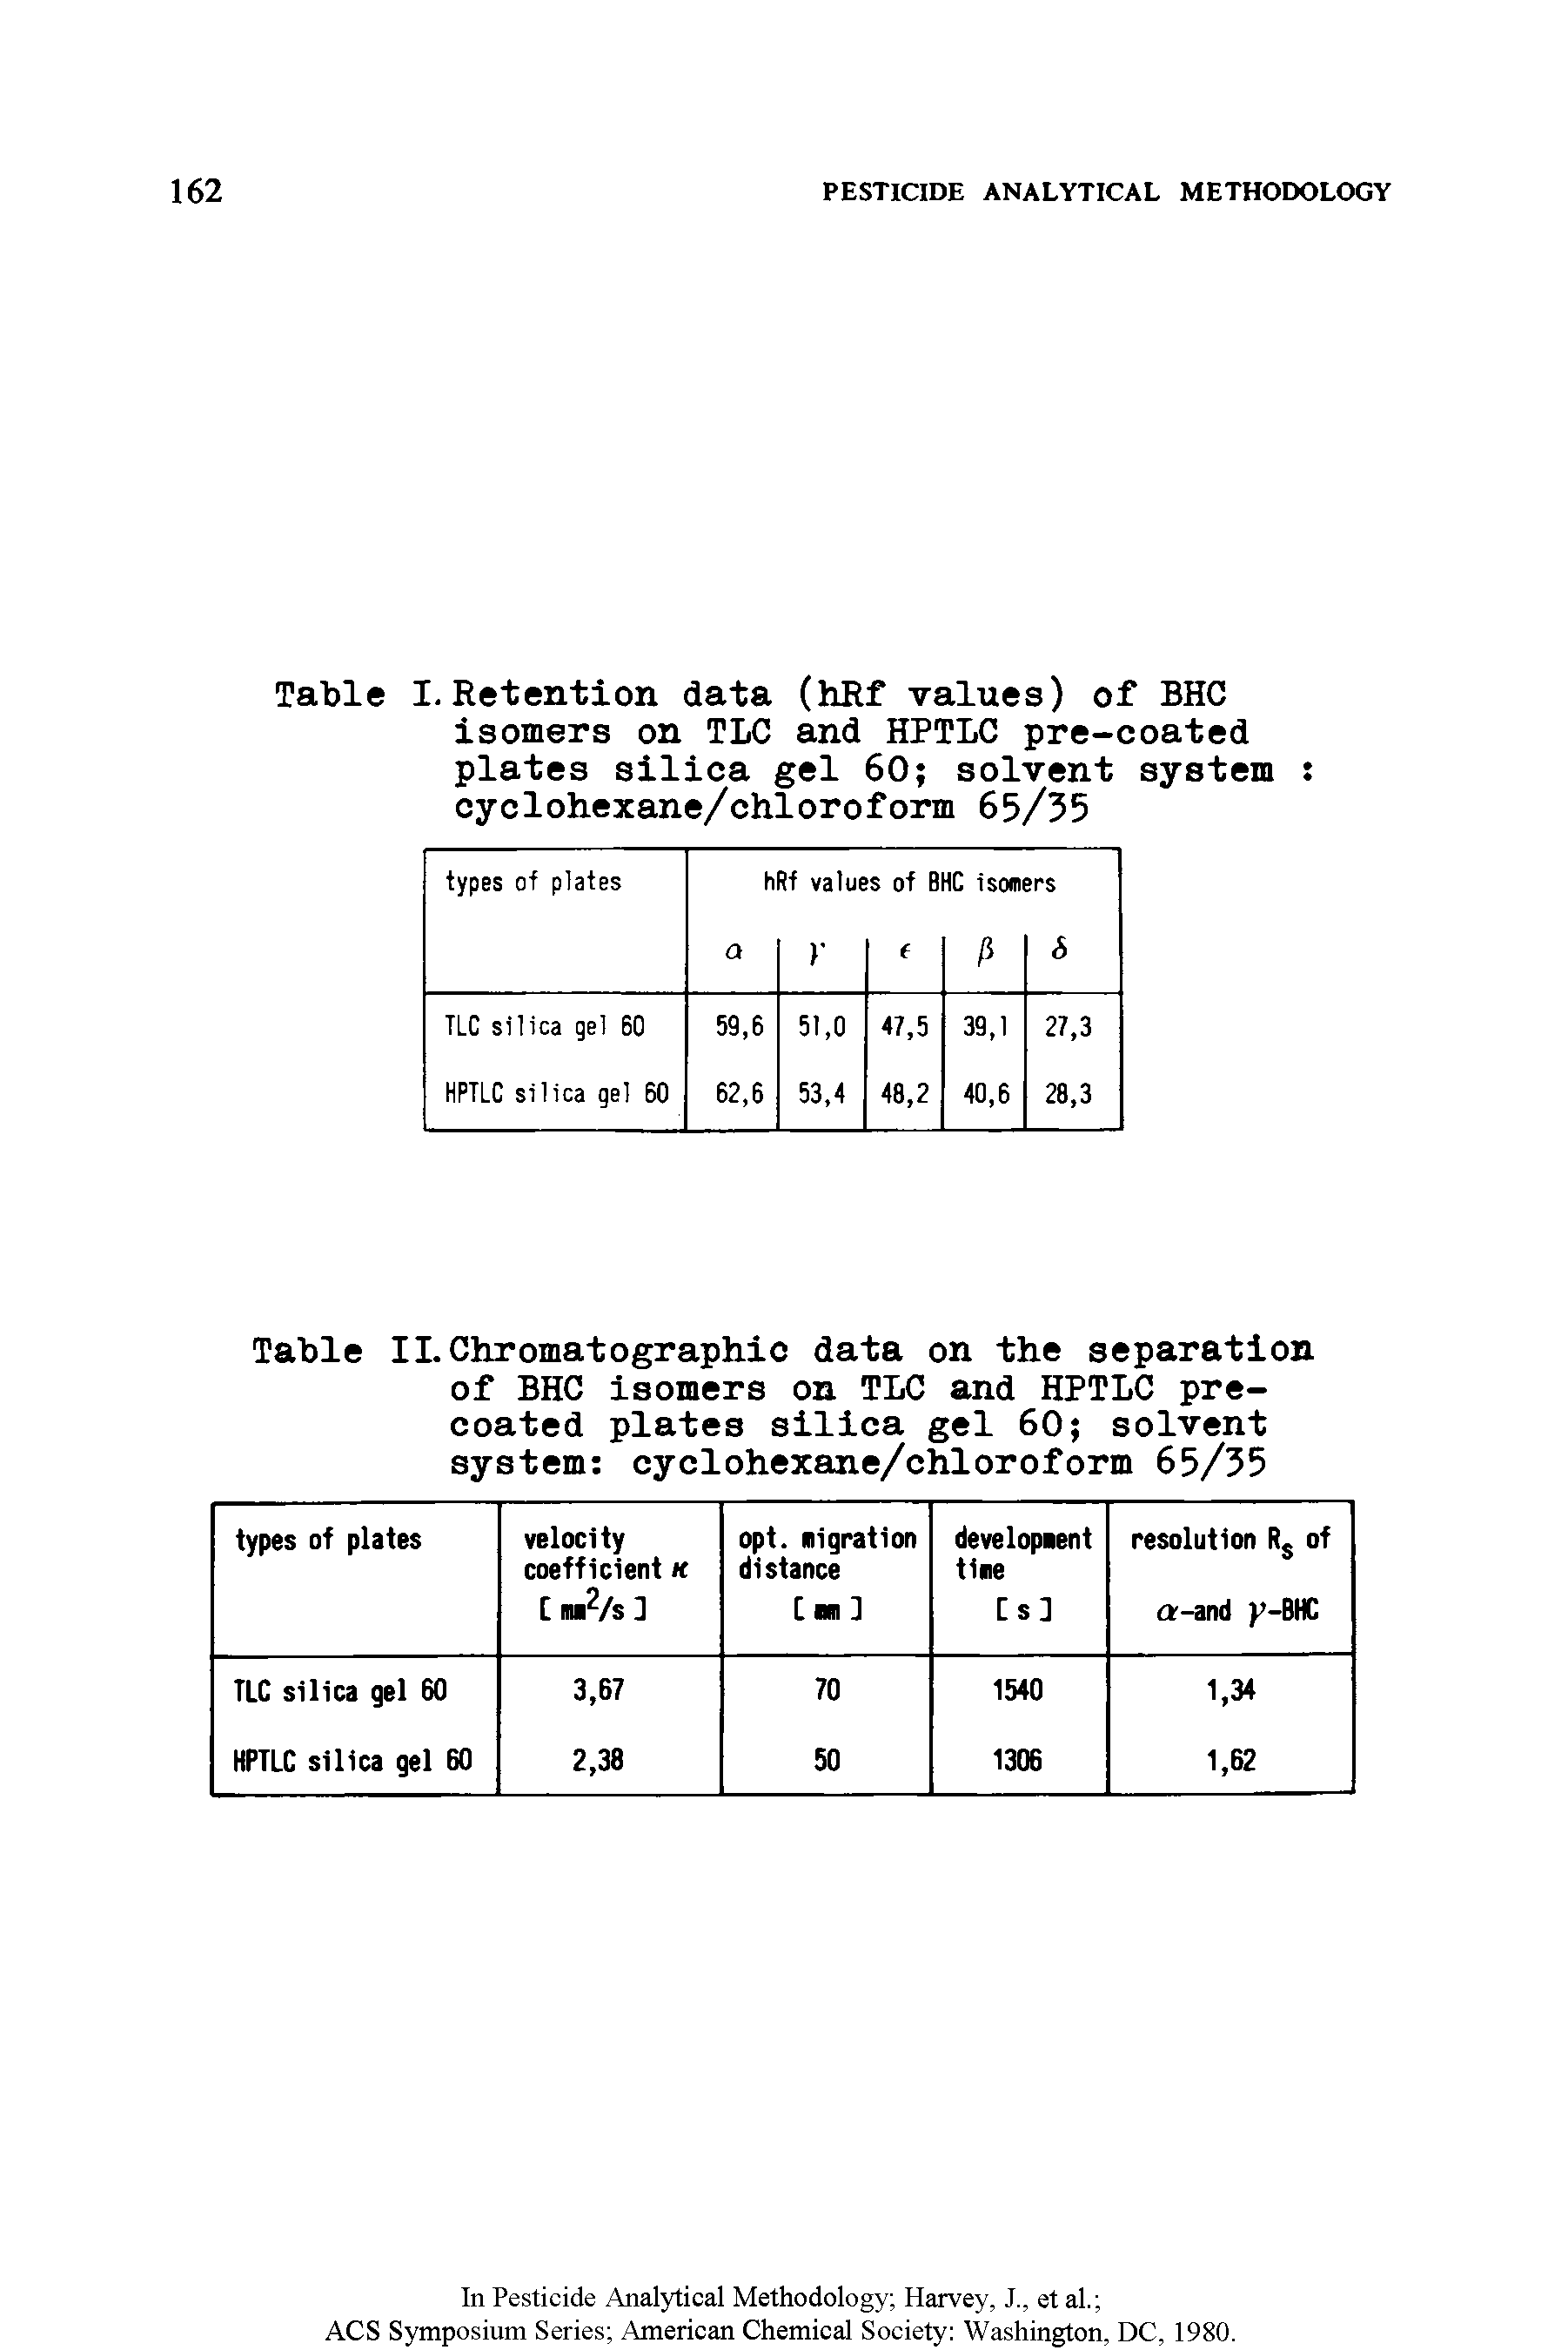 Table I.Retention data (hRf values) of BHC isomers on TLC and HPTLC pre-coated plates silica gel 60 solvent system cyclohexane/chloroform 65/35...